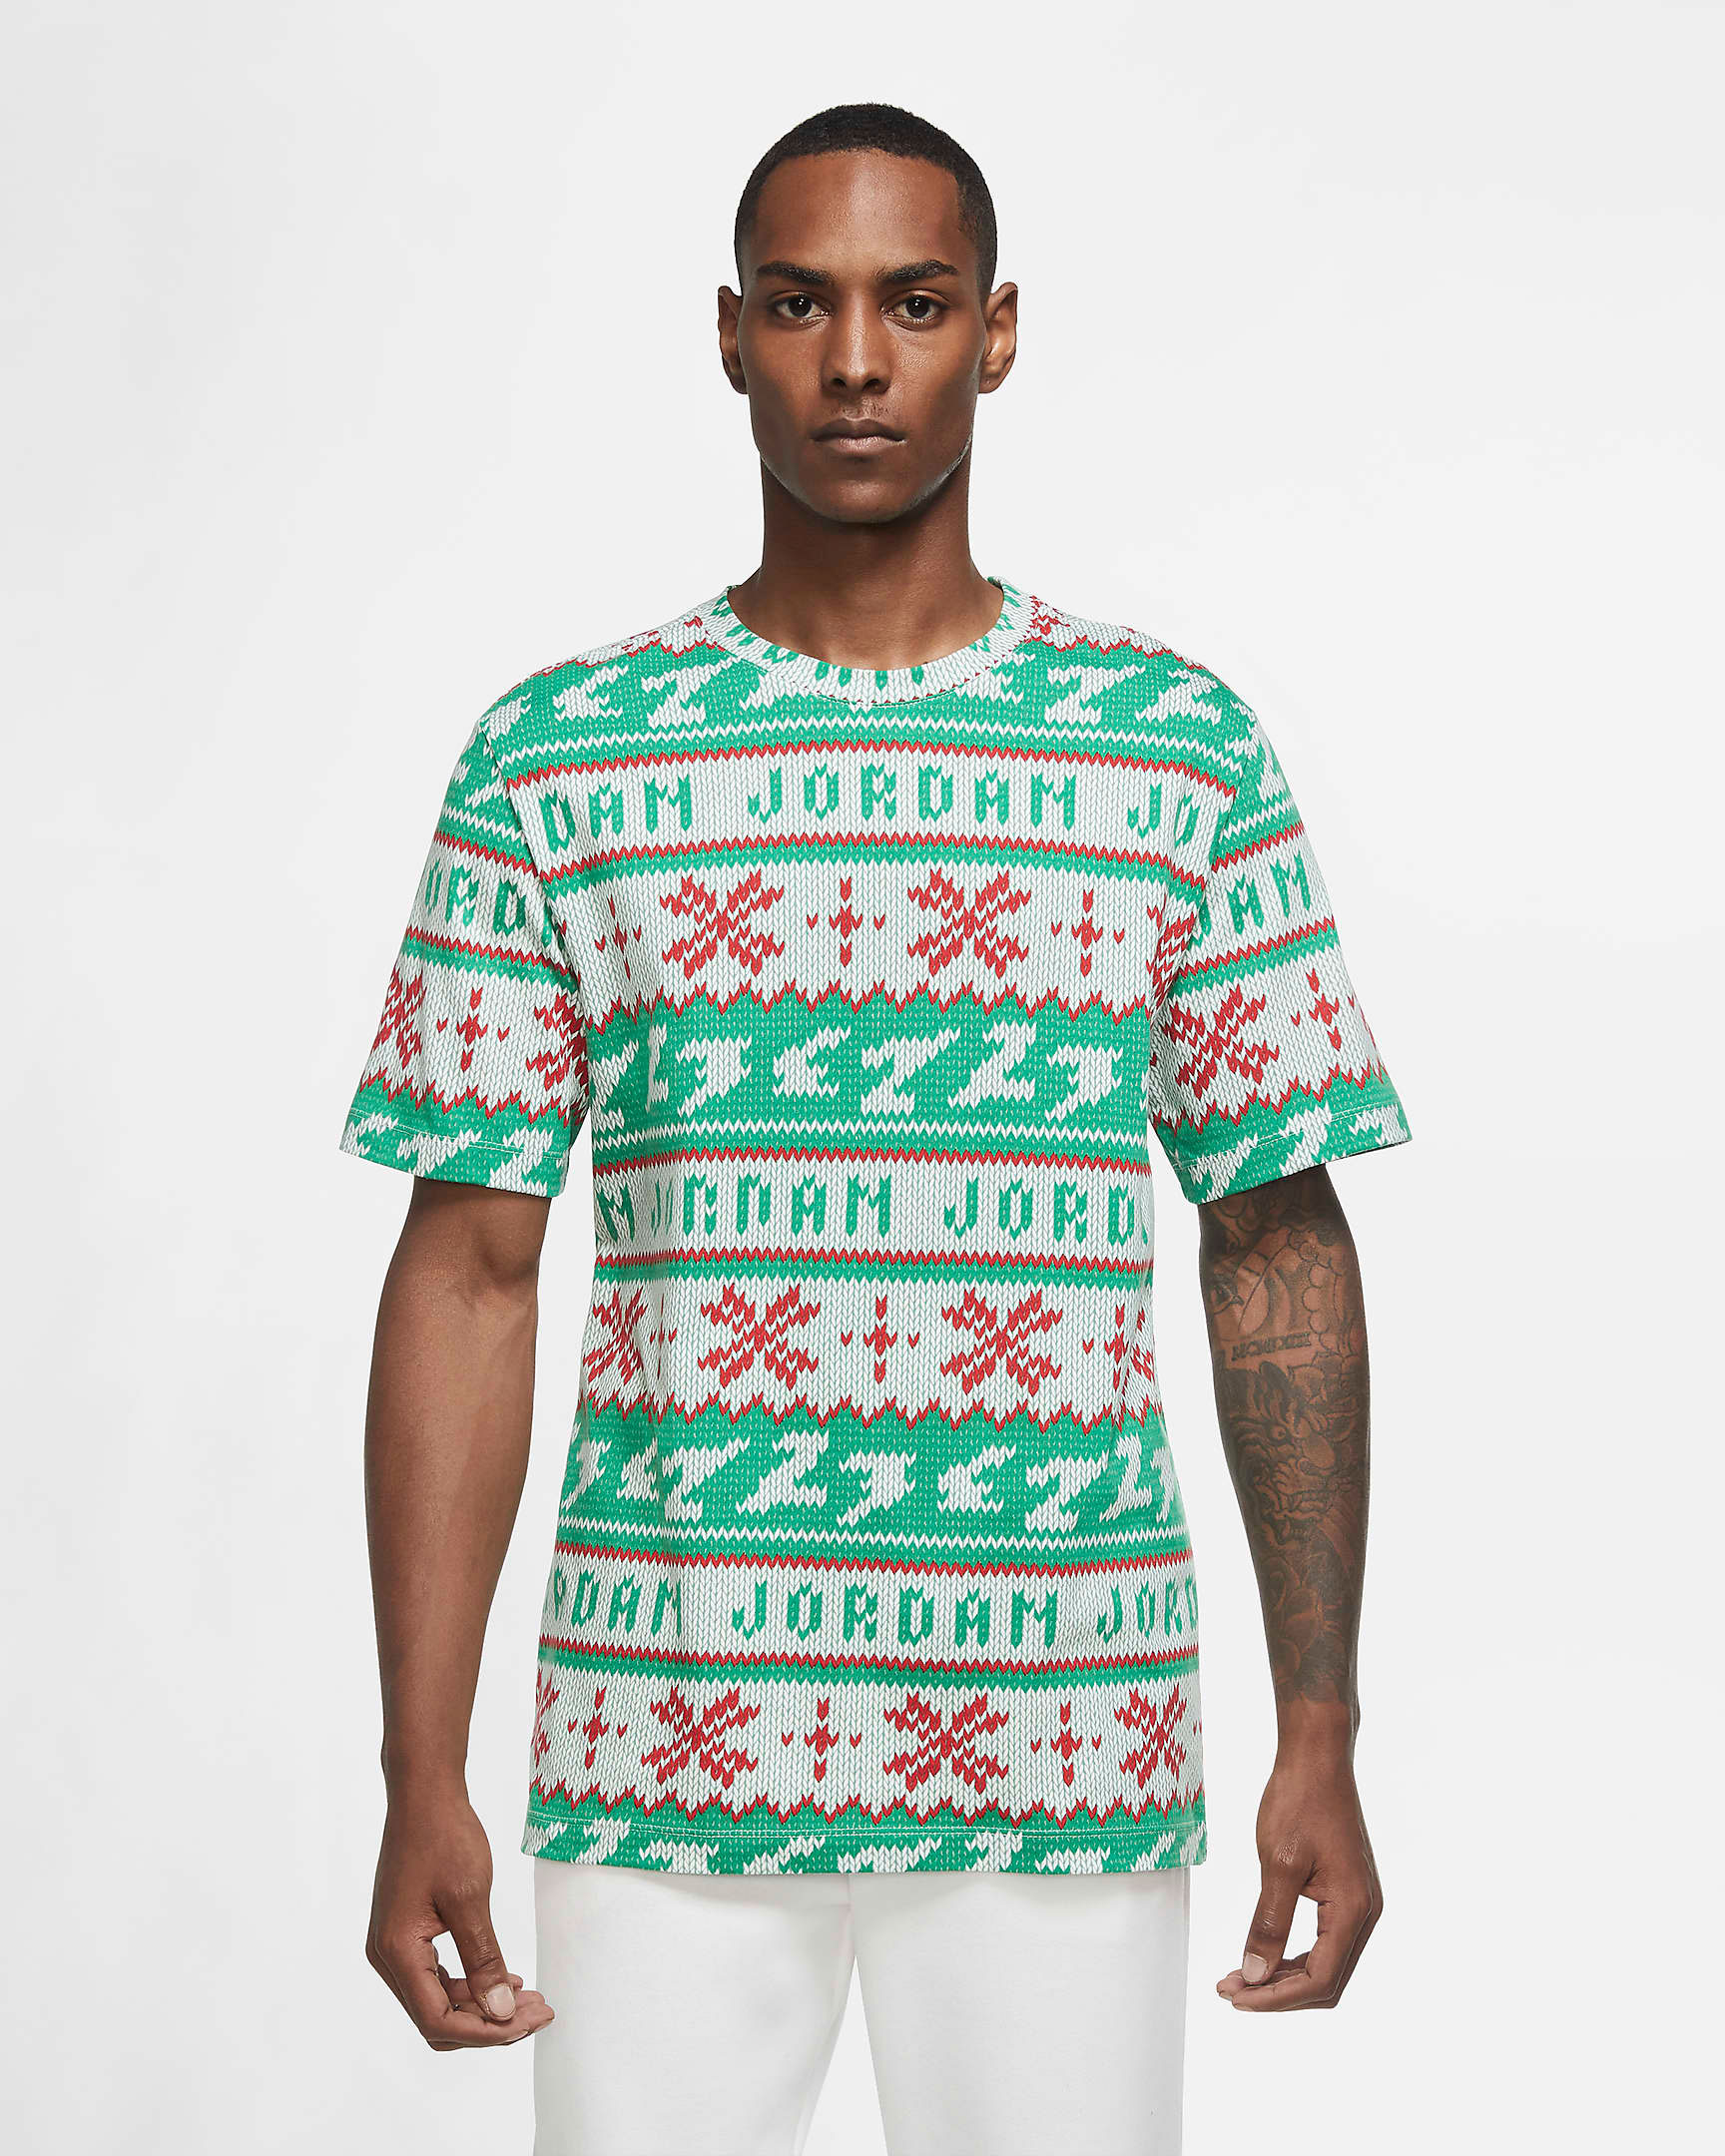 jordan-holiday-ugly-sweater-shirt-green-red-white-1